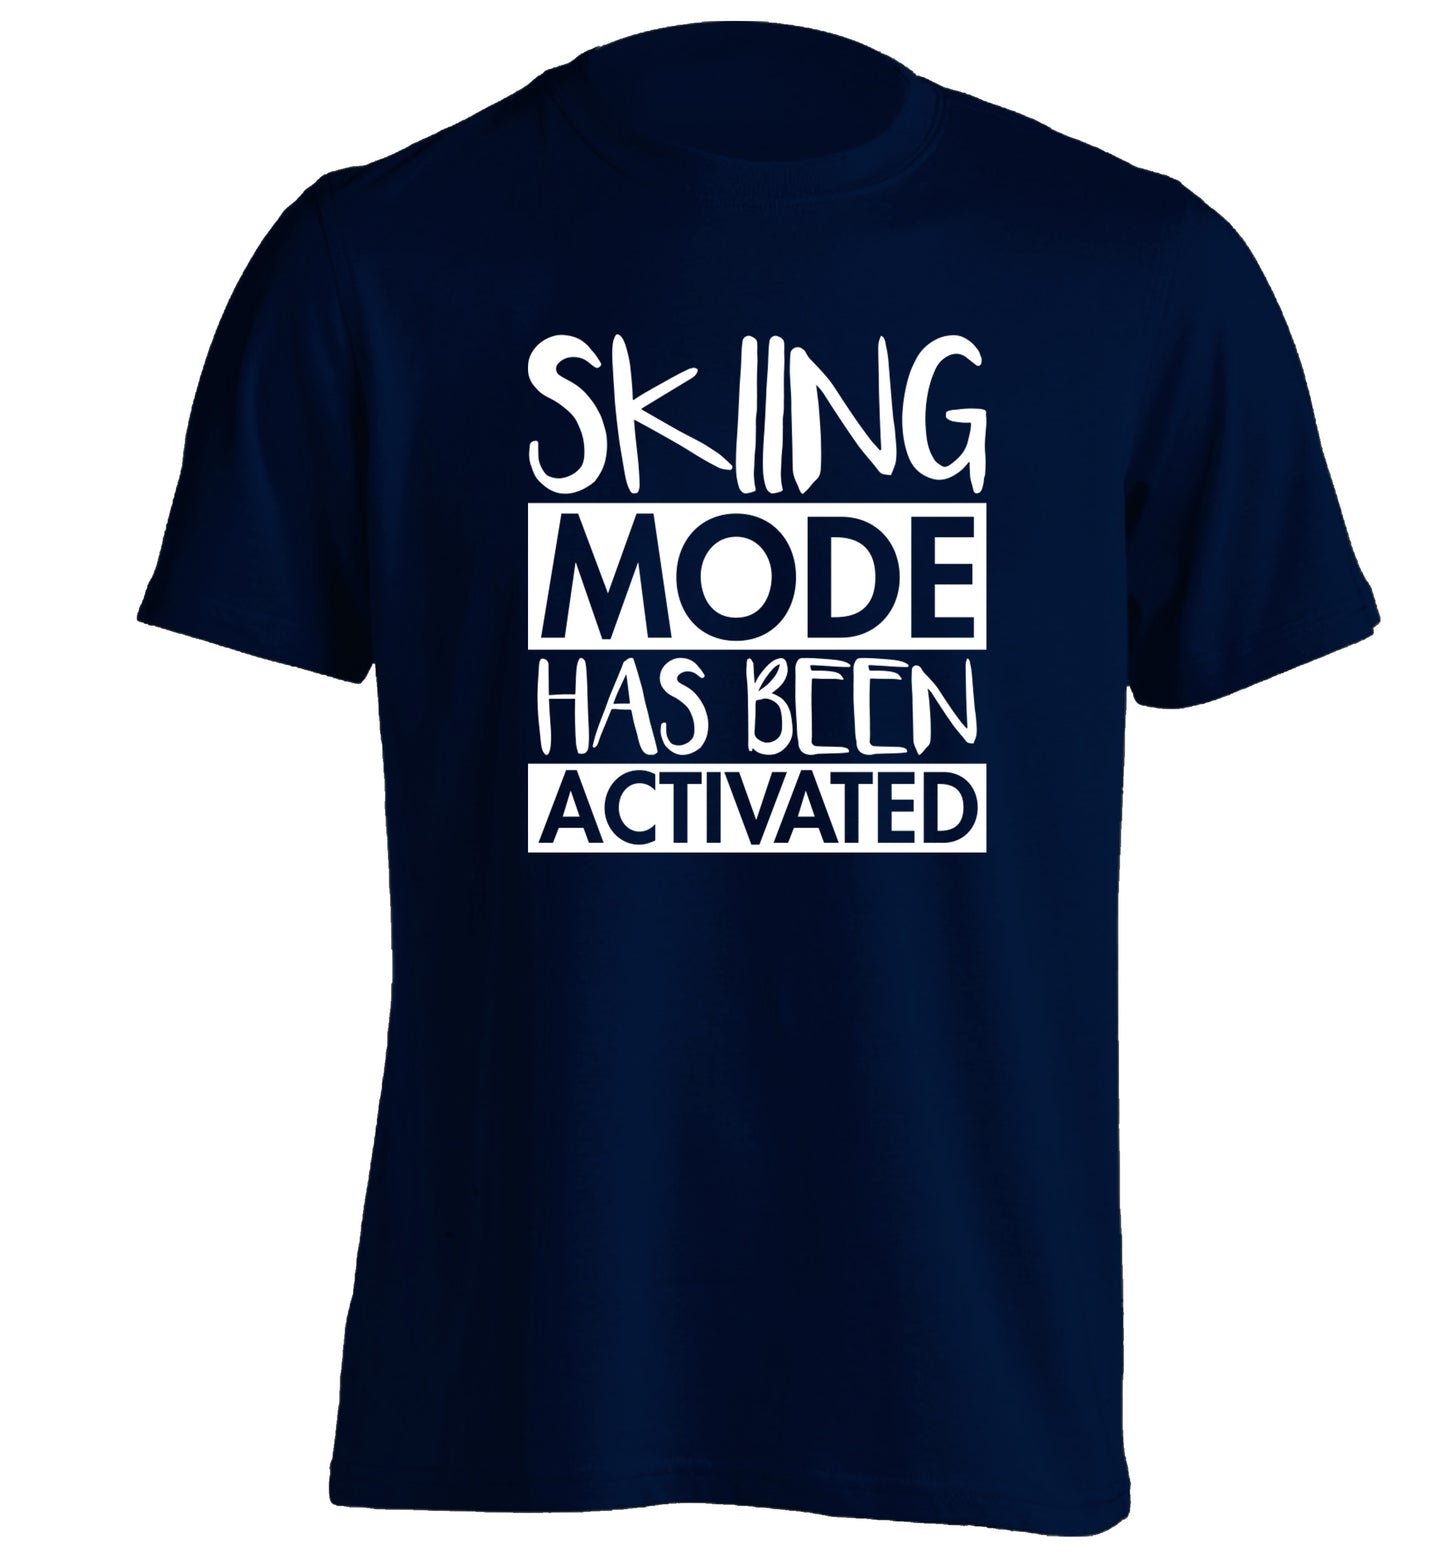 Skiing mode activated adults unisexnavy Tshirt 2XL